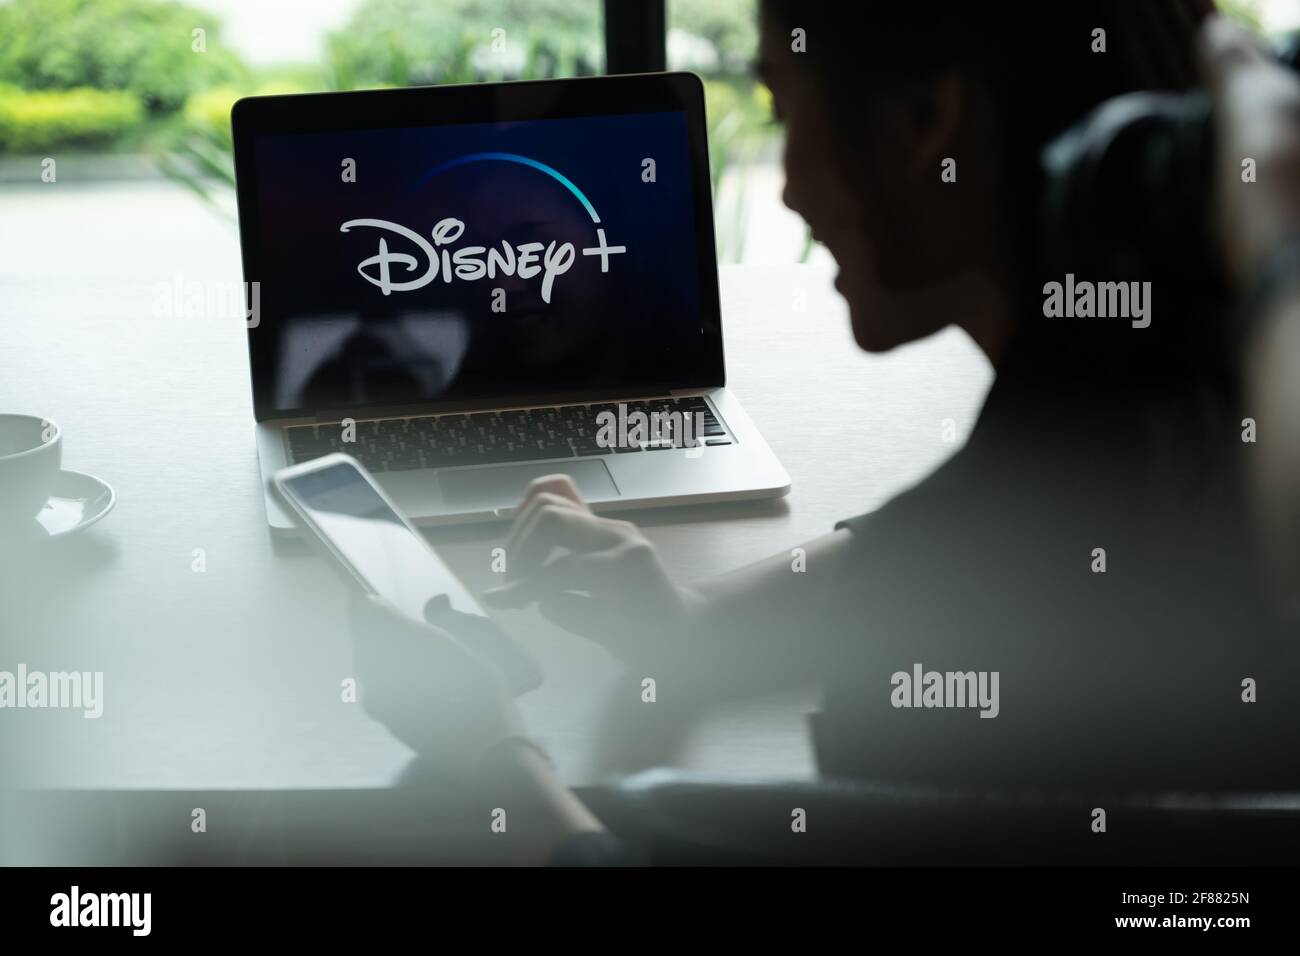 CHIANGMAI, THAILAND - JULY 25 ,2020 : Macbook with Disney plus on screen. Disney+ is an online video streaming subscription service, set to launch in Stock Photo